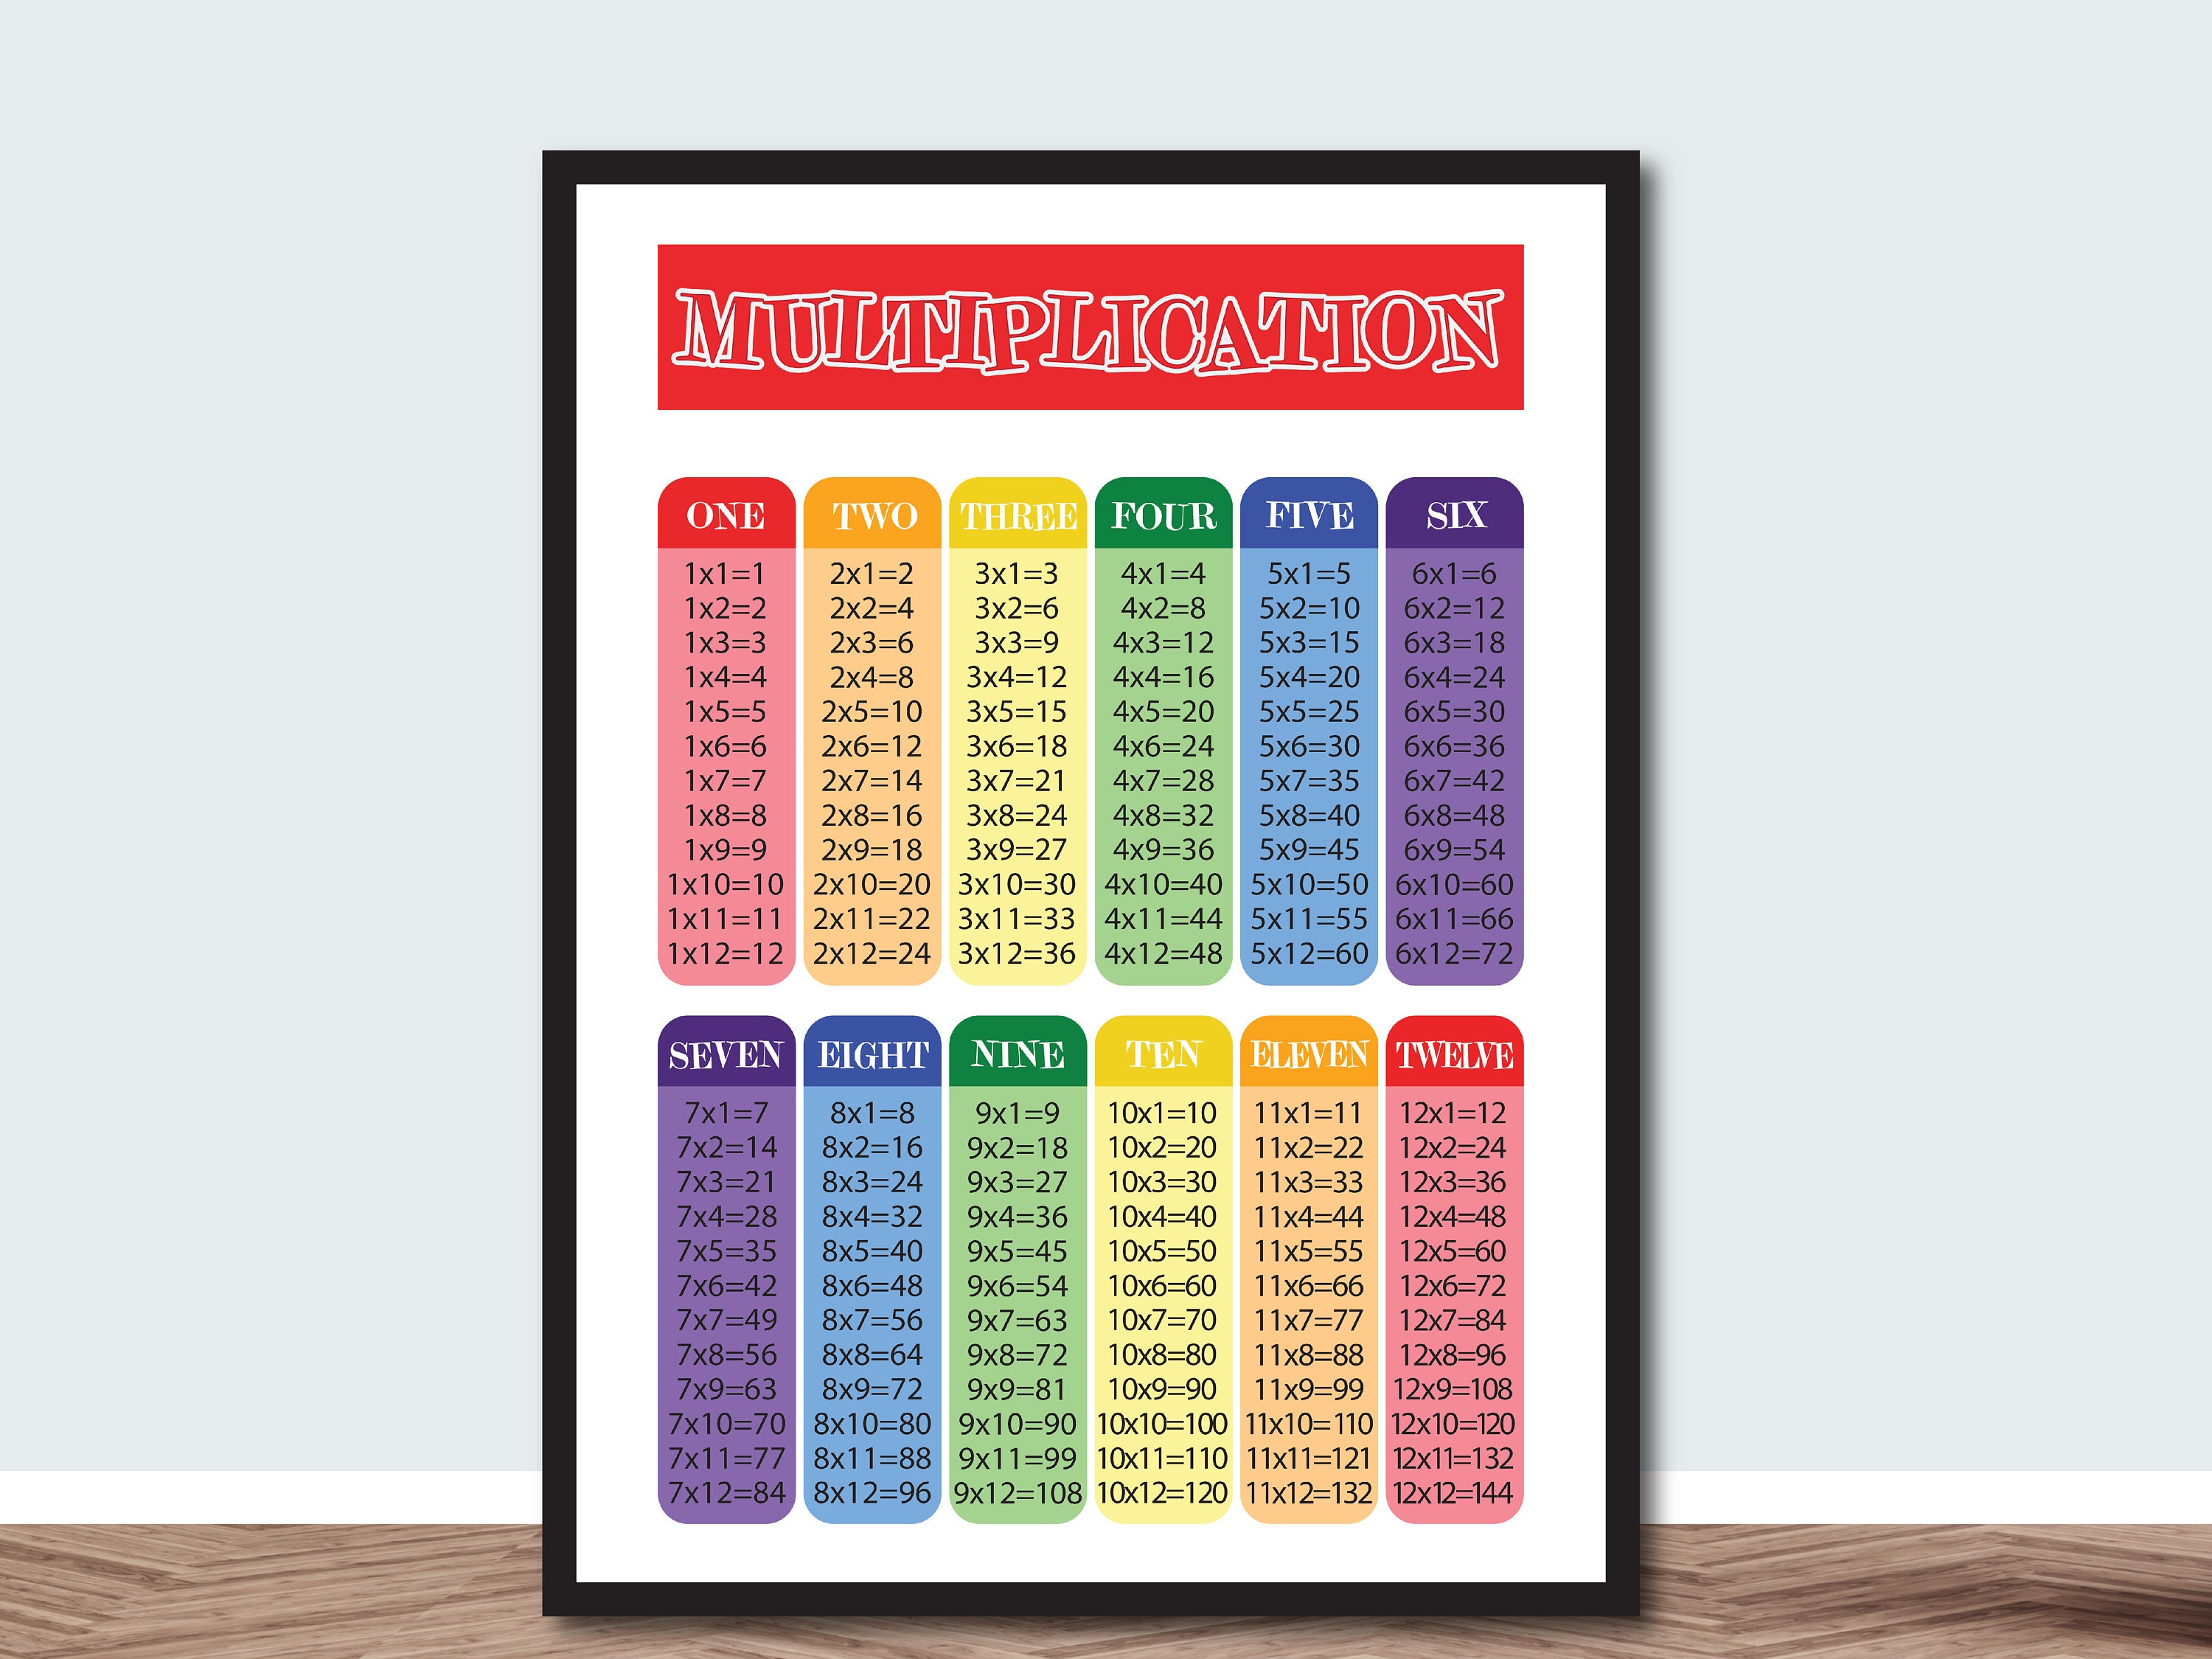 Kids Educational Math Poster 112 Multiplication Table Canvas Wall Art ▻   ▻ Free Shipping ▻ Up to 70% OFF